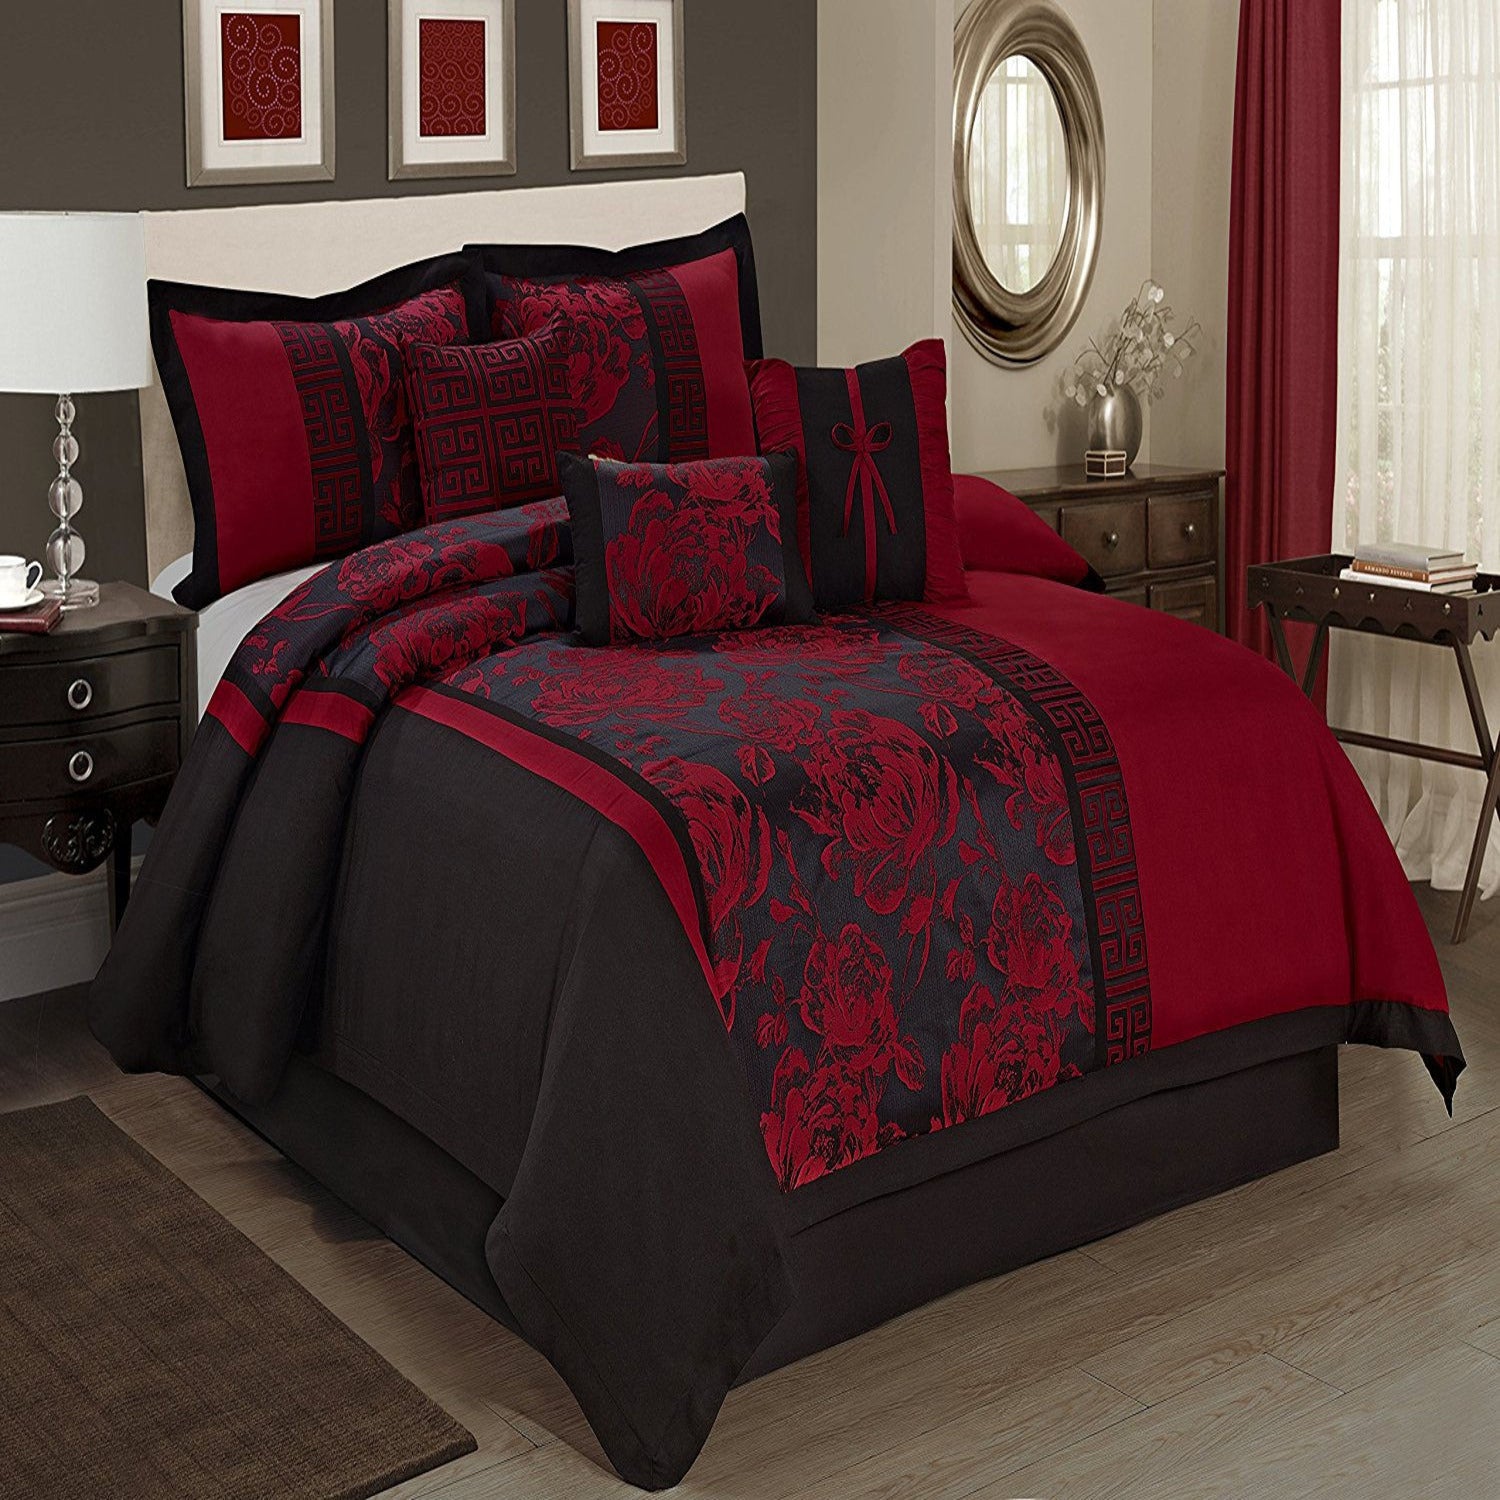 PEONY 7PC BURGUNDY BEDDING COMFORTER SET. RUFFLE & PATCHWORK, MICROFIBER FABRIC, FADE RESISTANT, SUPER SOFT, BED IN A BAG